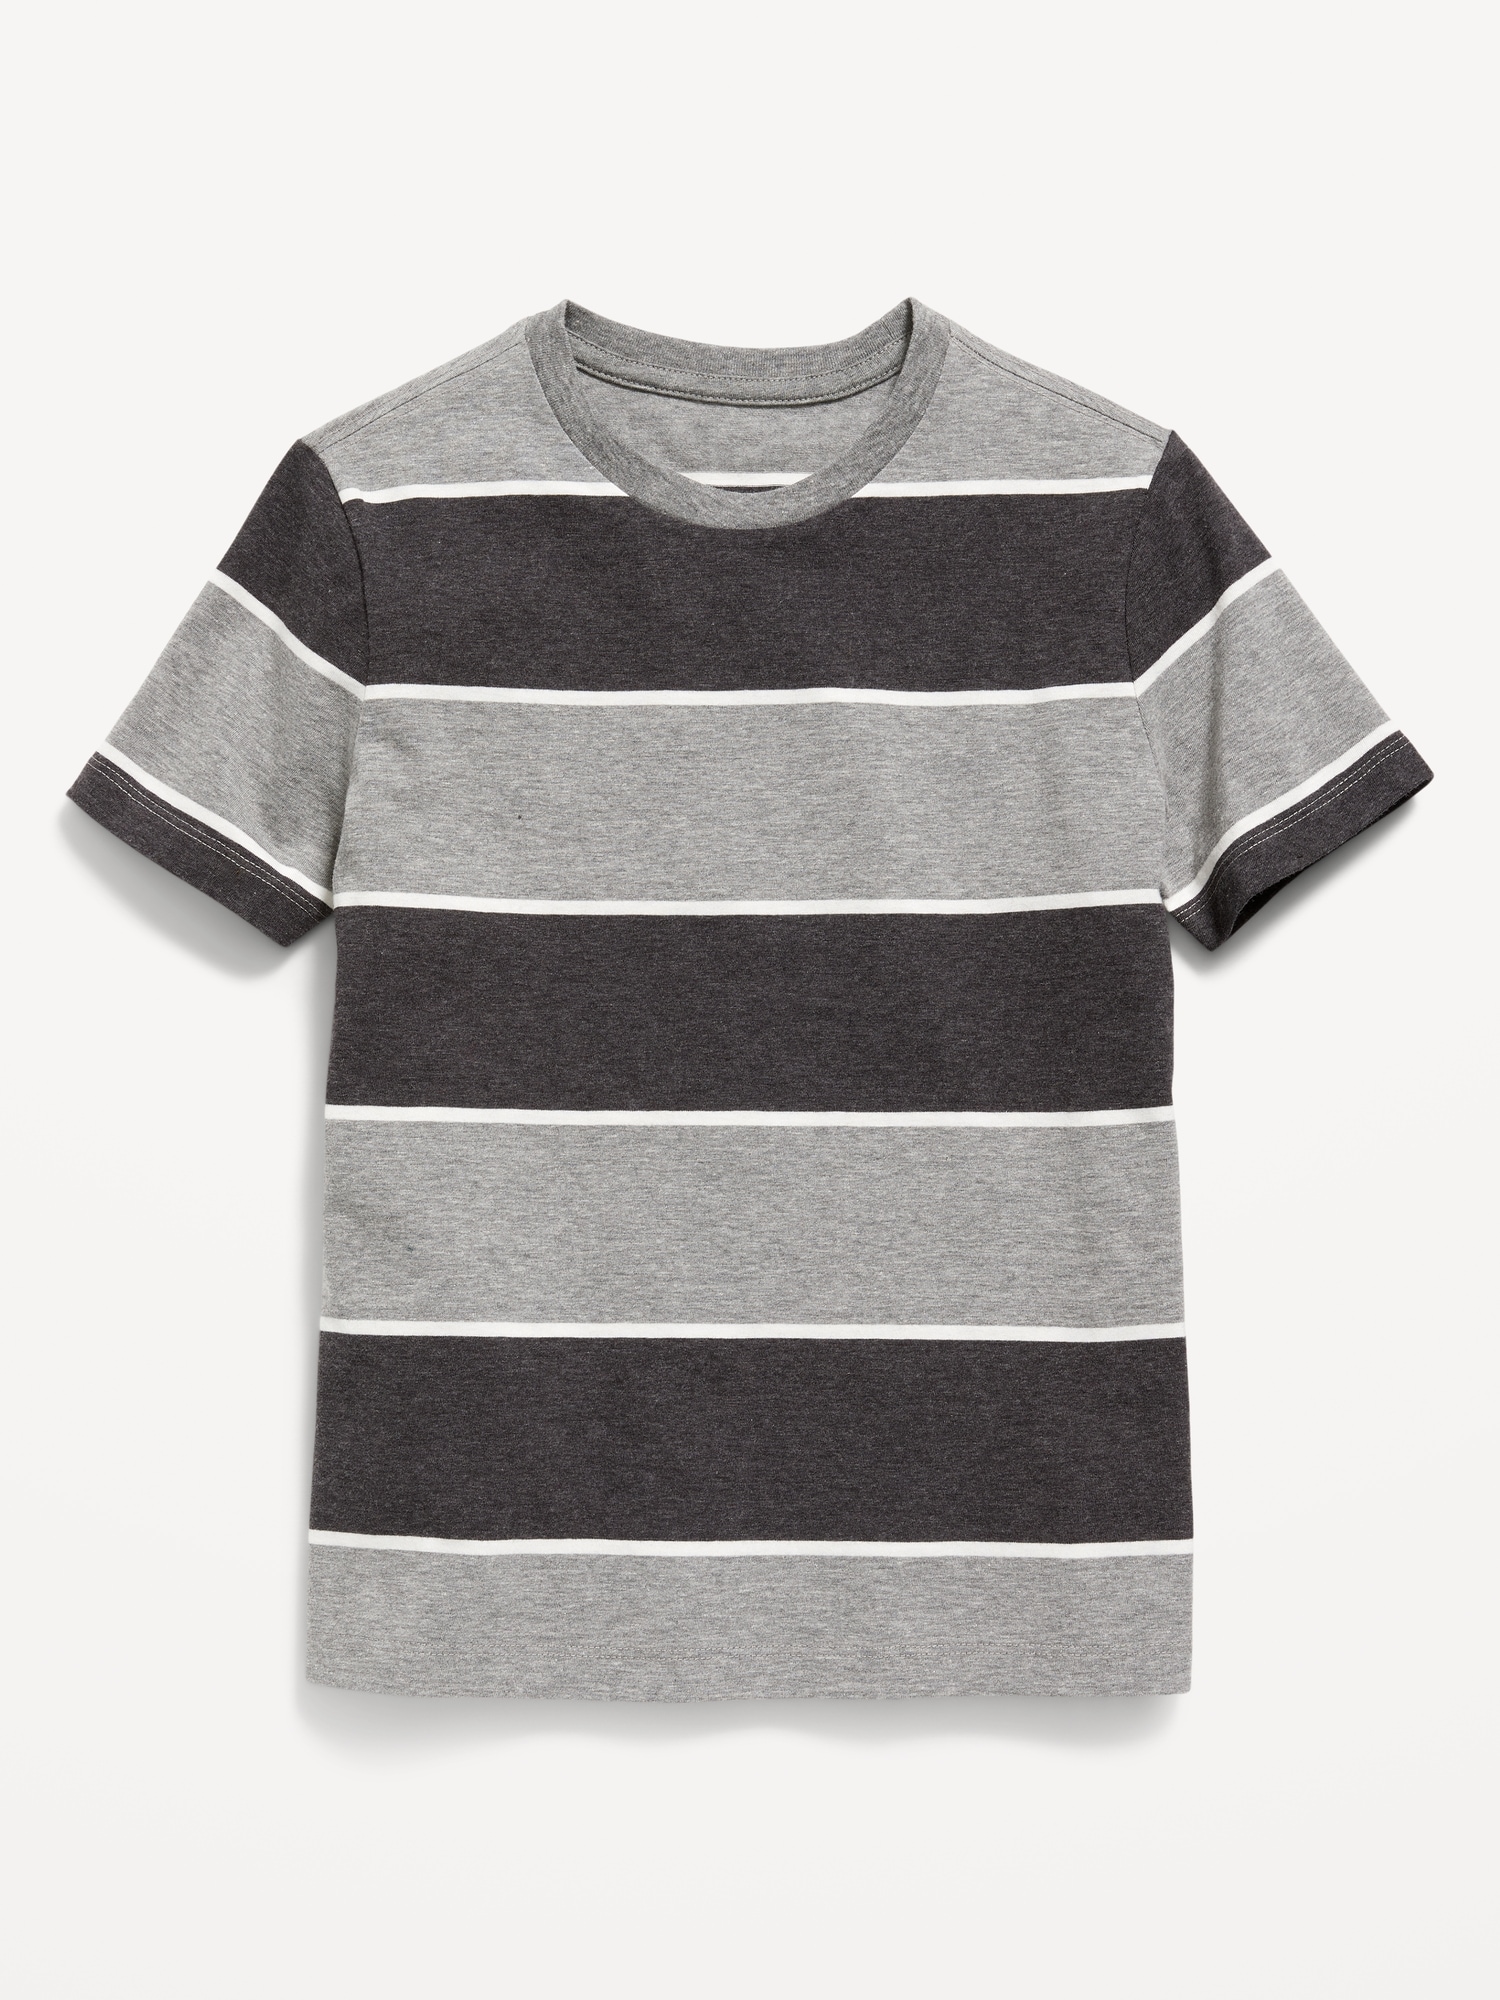 Old Navy Softest Short-Sleeve Striped T-Shirt for Boys gray. 1